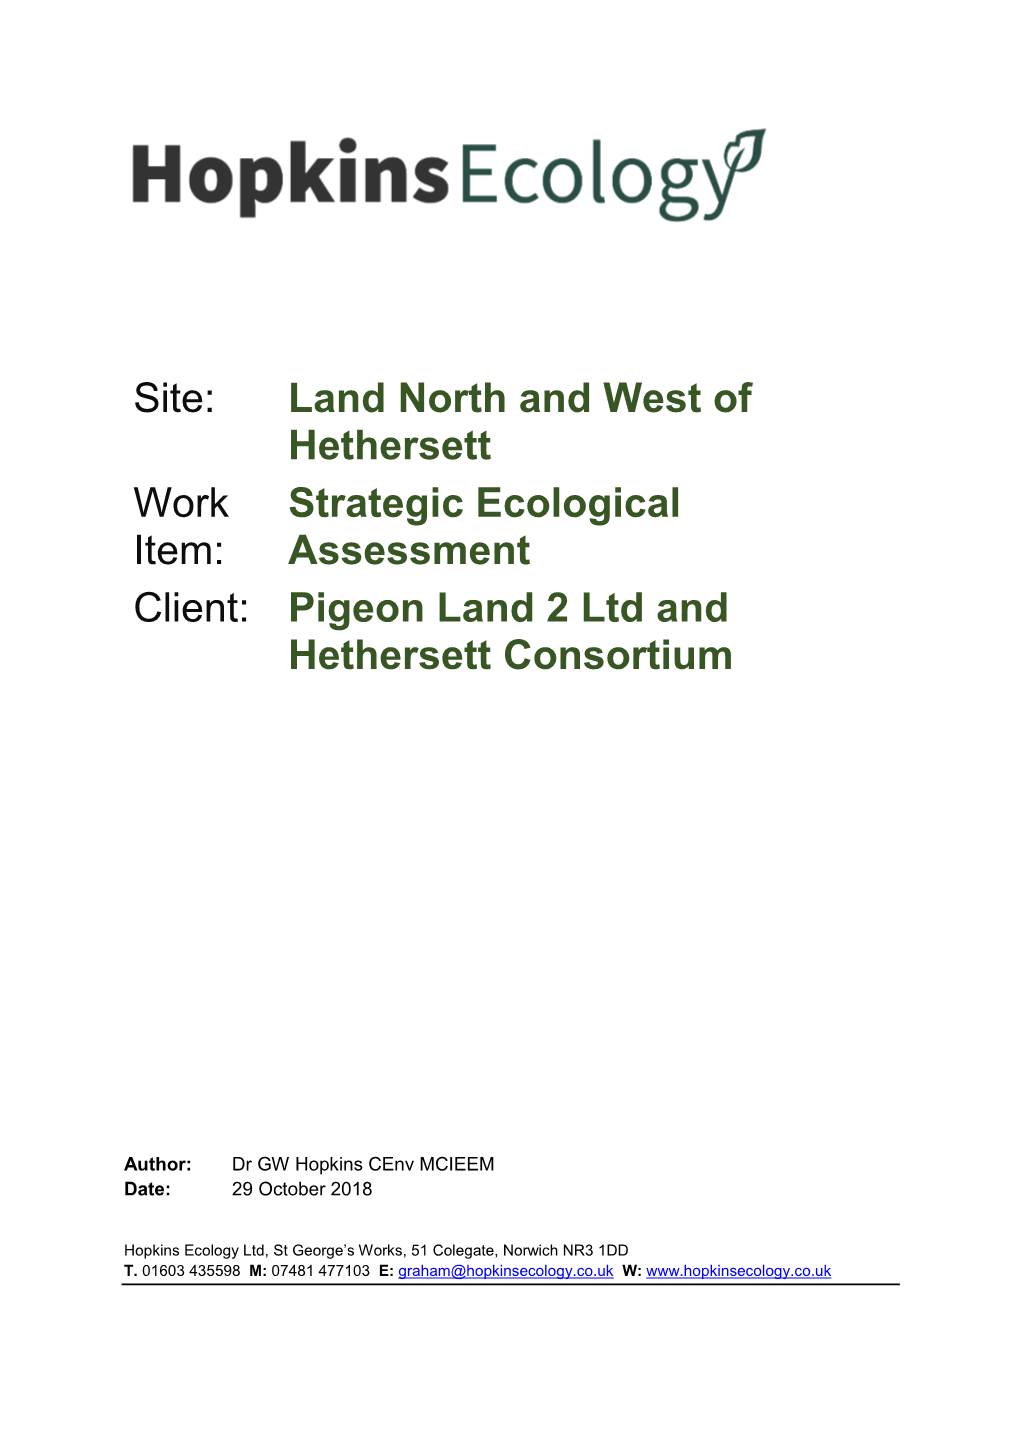 Site: Land North and West of Hethersett Work Item